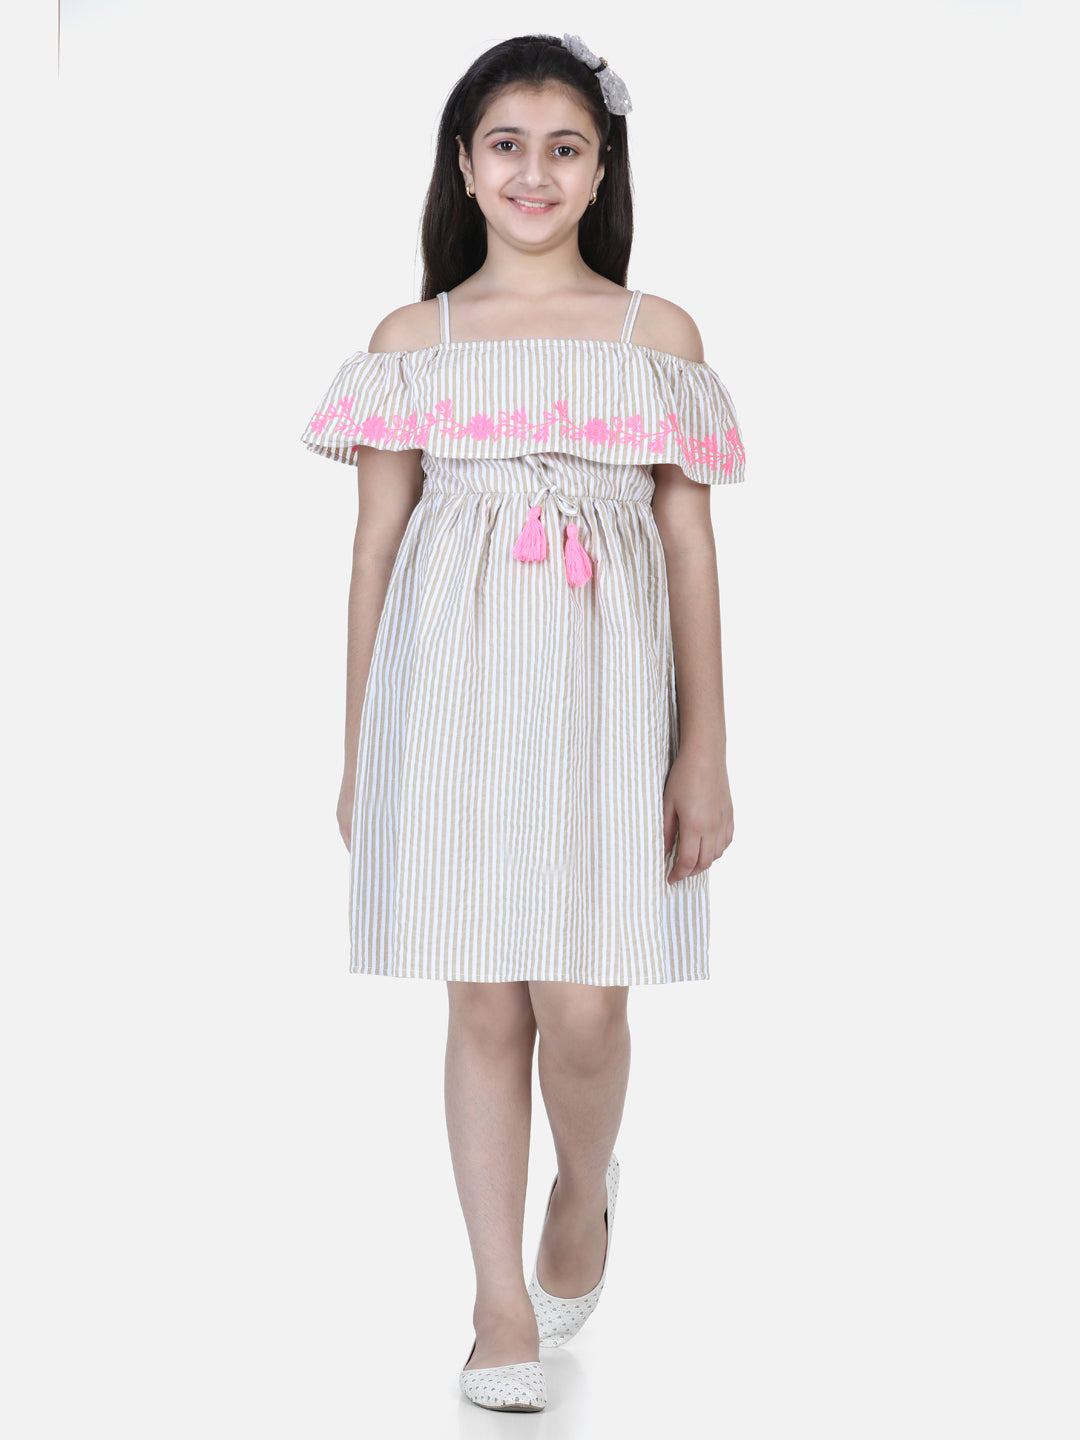 Girls Beie OffShoulder Dress with Pink Embroidery